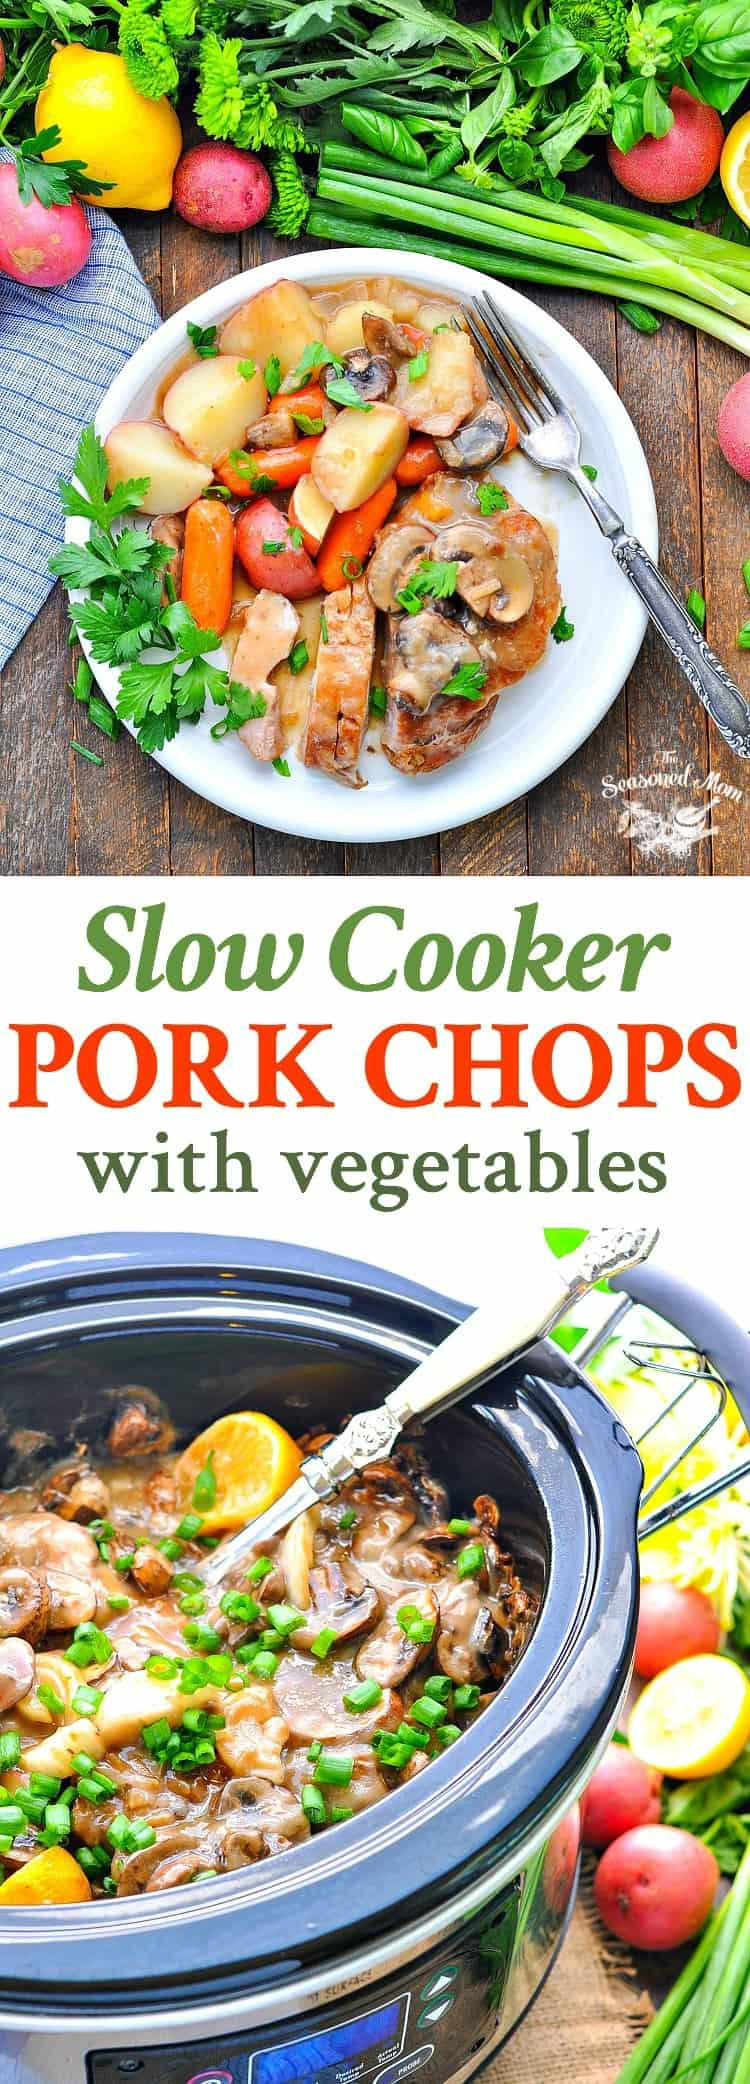 Pork Chops In Slow Cooker Recipes
 Slow Cooker Pork Chops with Ve ables and Gravy The